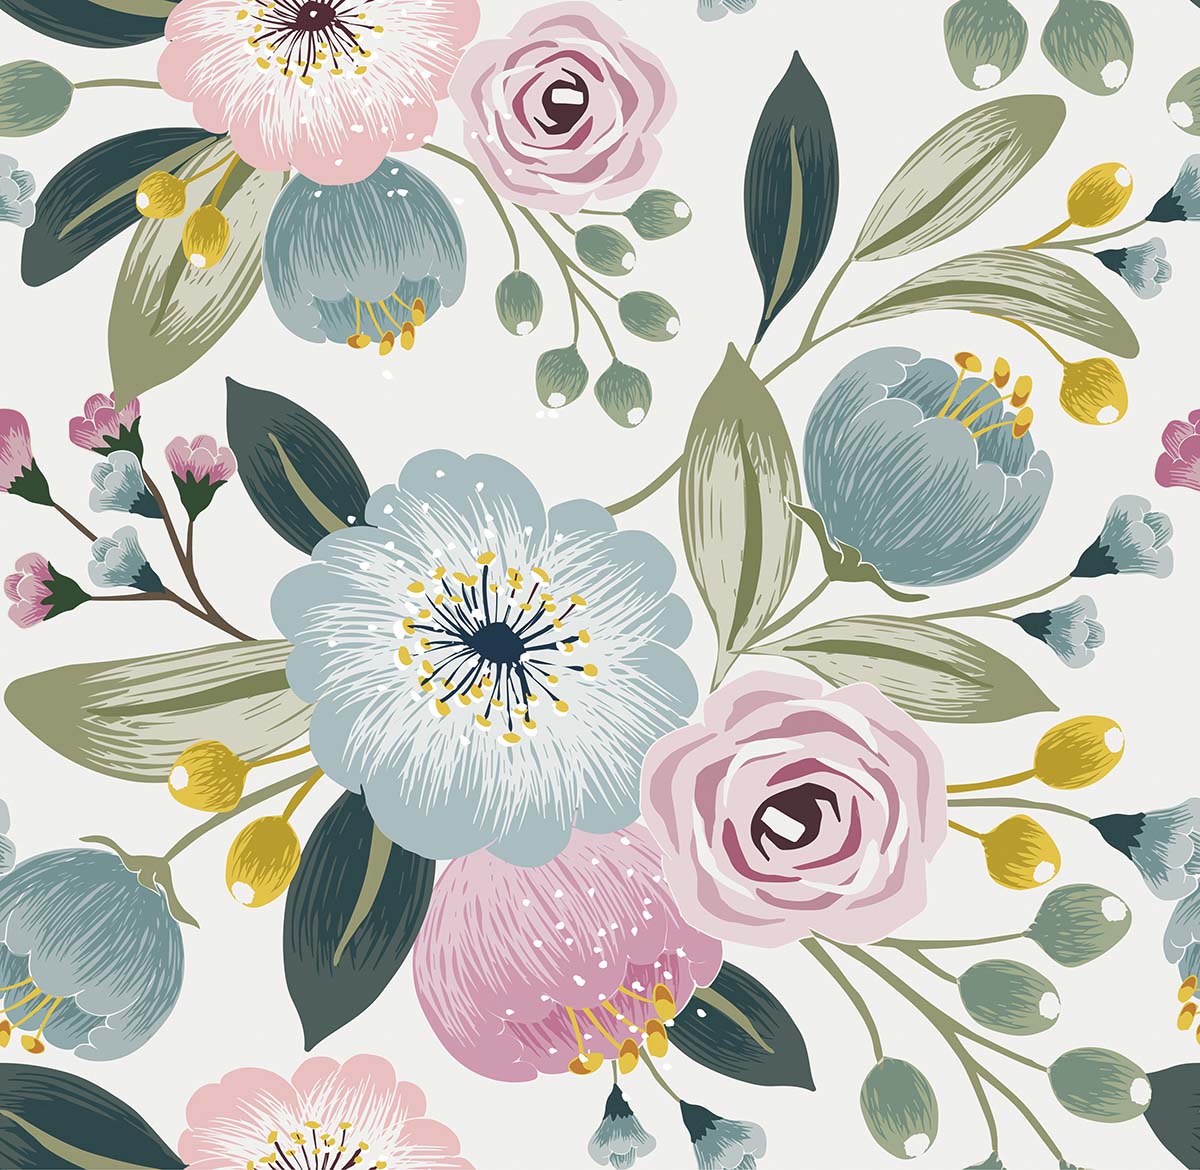 A floral pattern with flowers